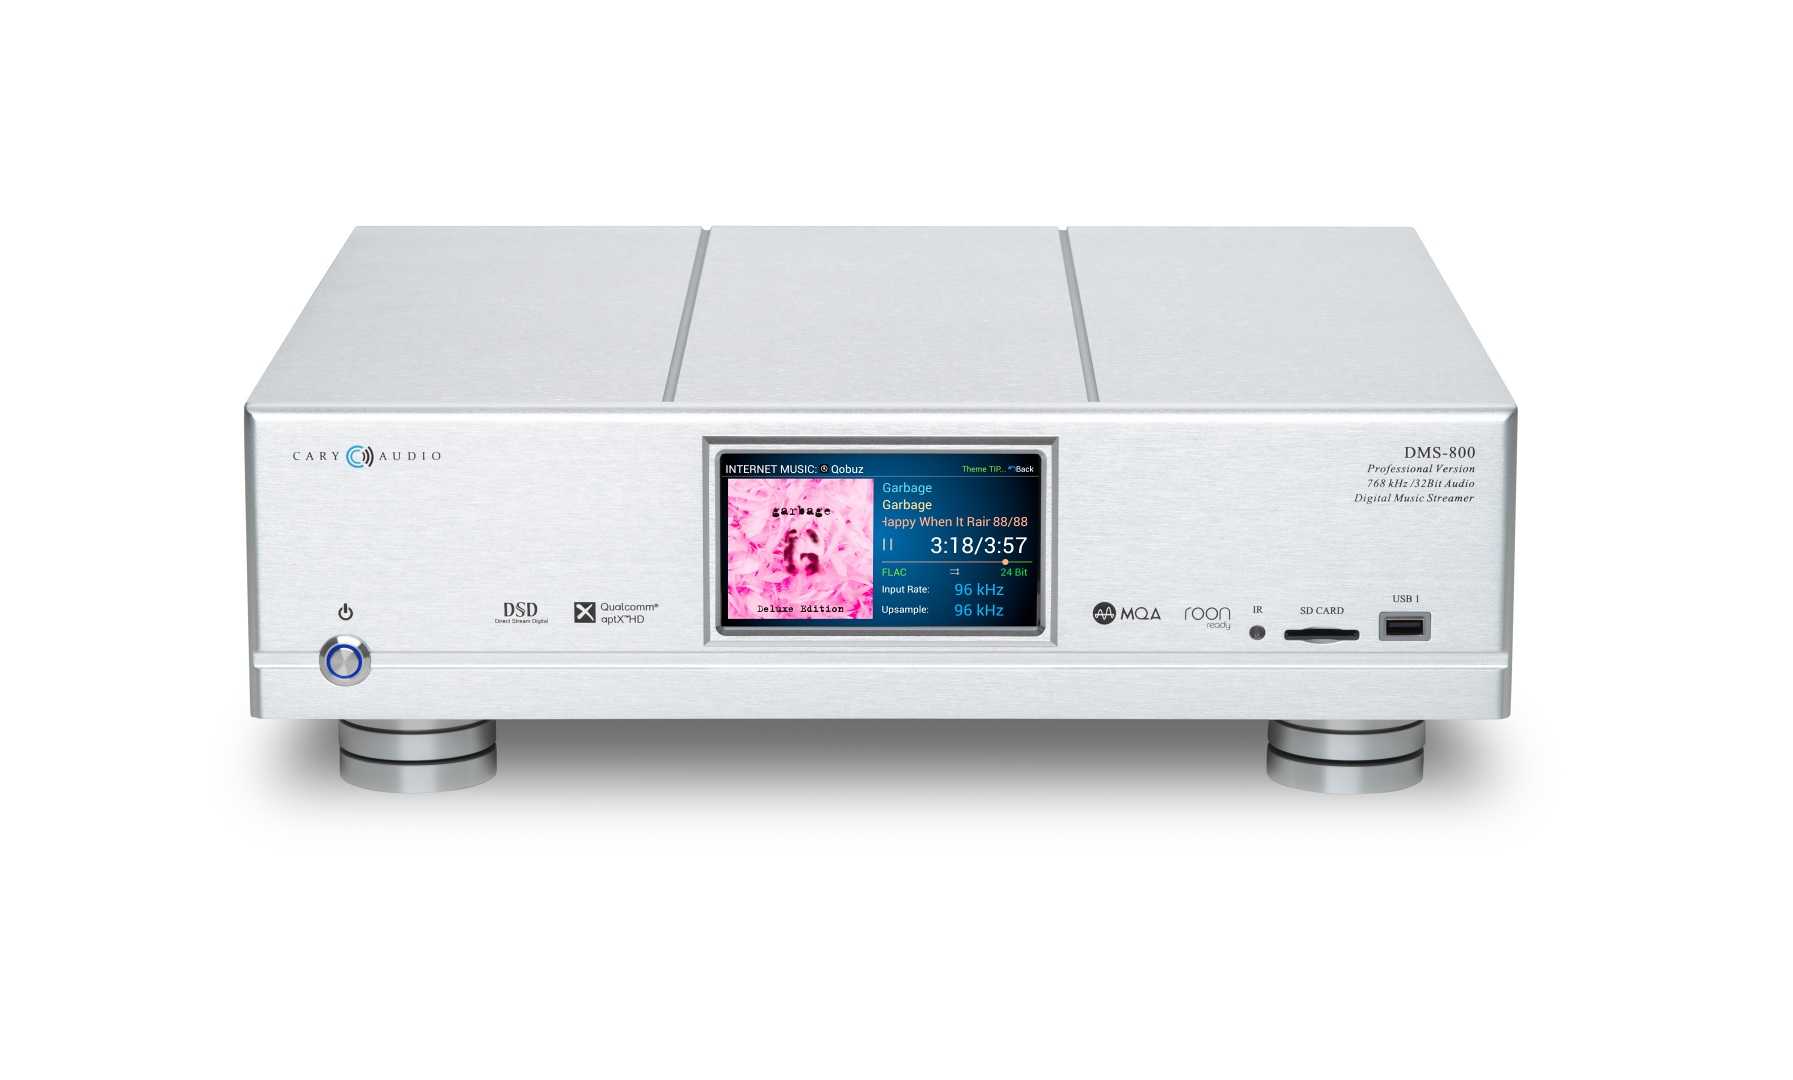 Cary audio - dms-550 network audio player